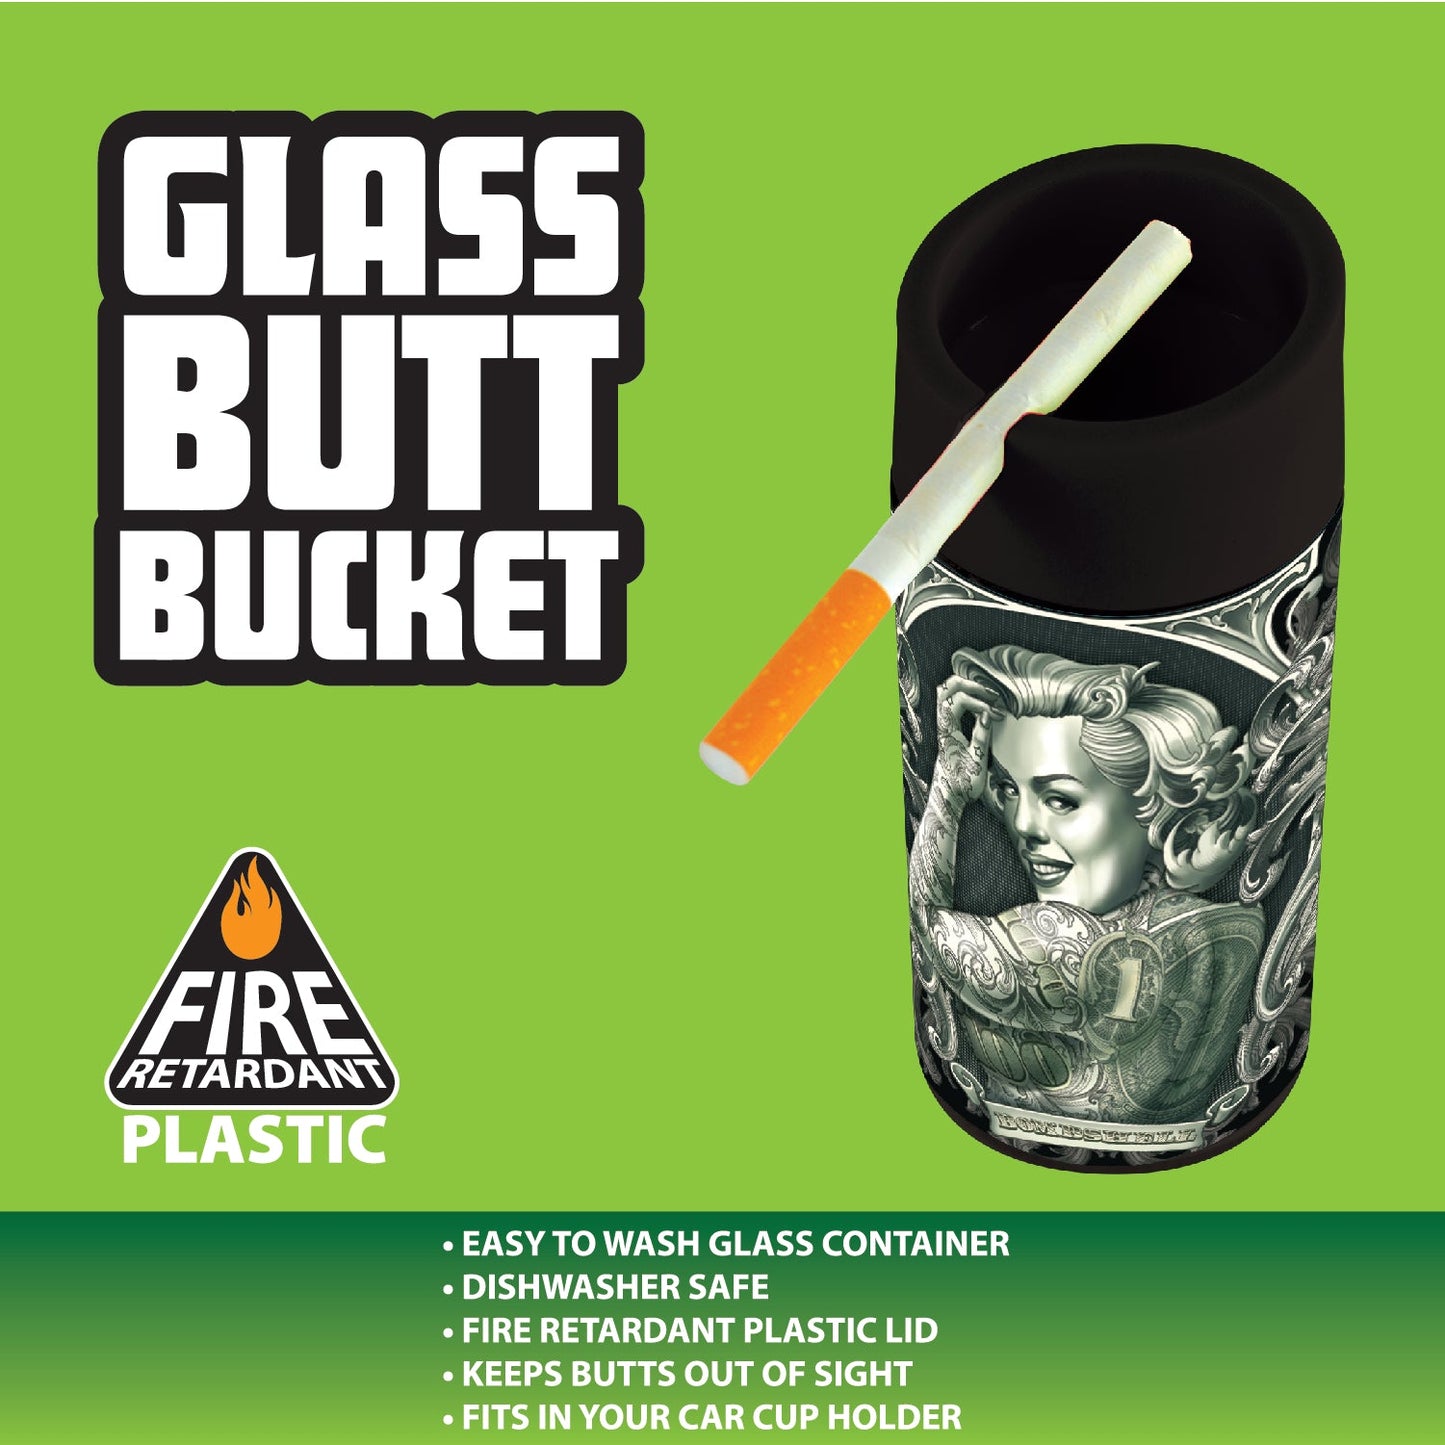 ITEM NUMBER 041462 GLASS BUTT BUCKET 3 PIECES PER DISPLAY